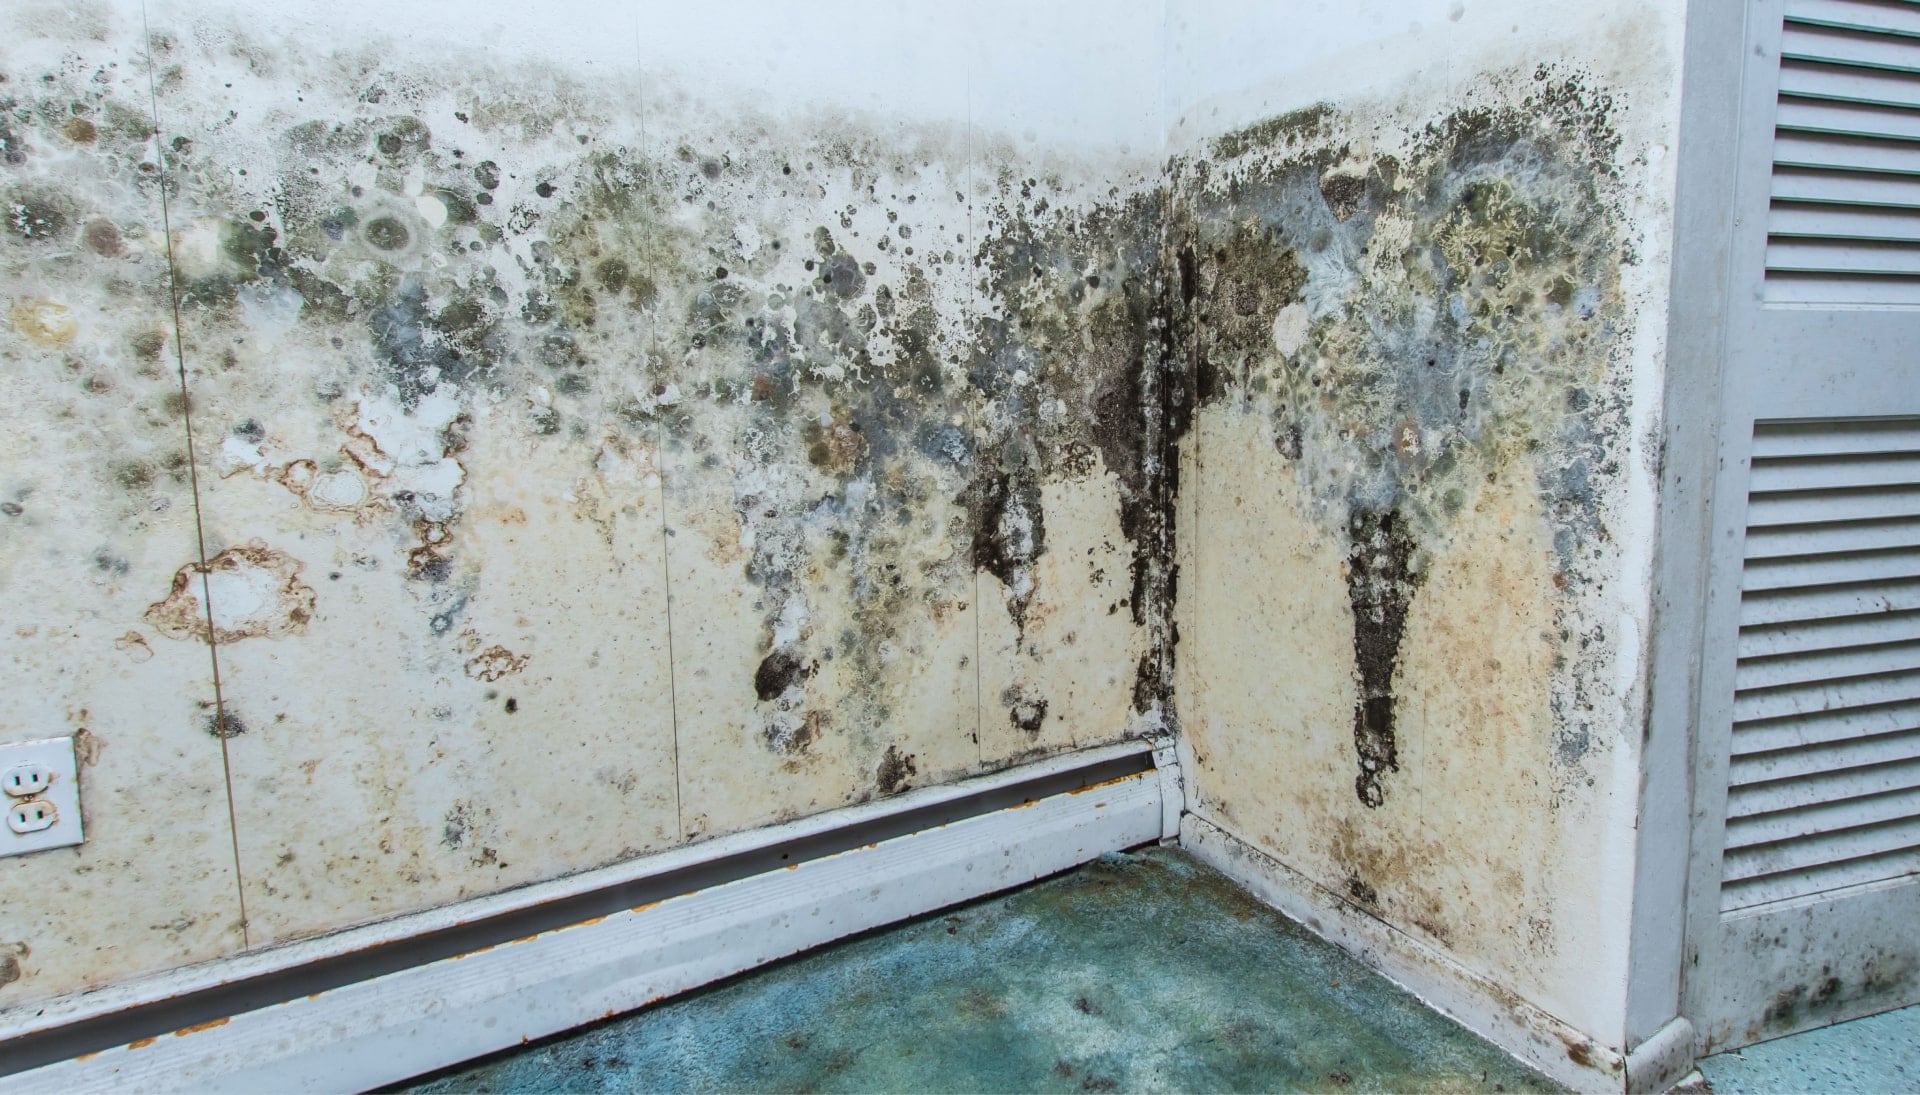 A mold remediation team using specialized techniques to remove mold damage and control odors in a Pensacola property, with a focus on safety and efficiency